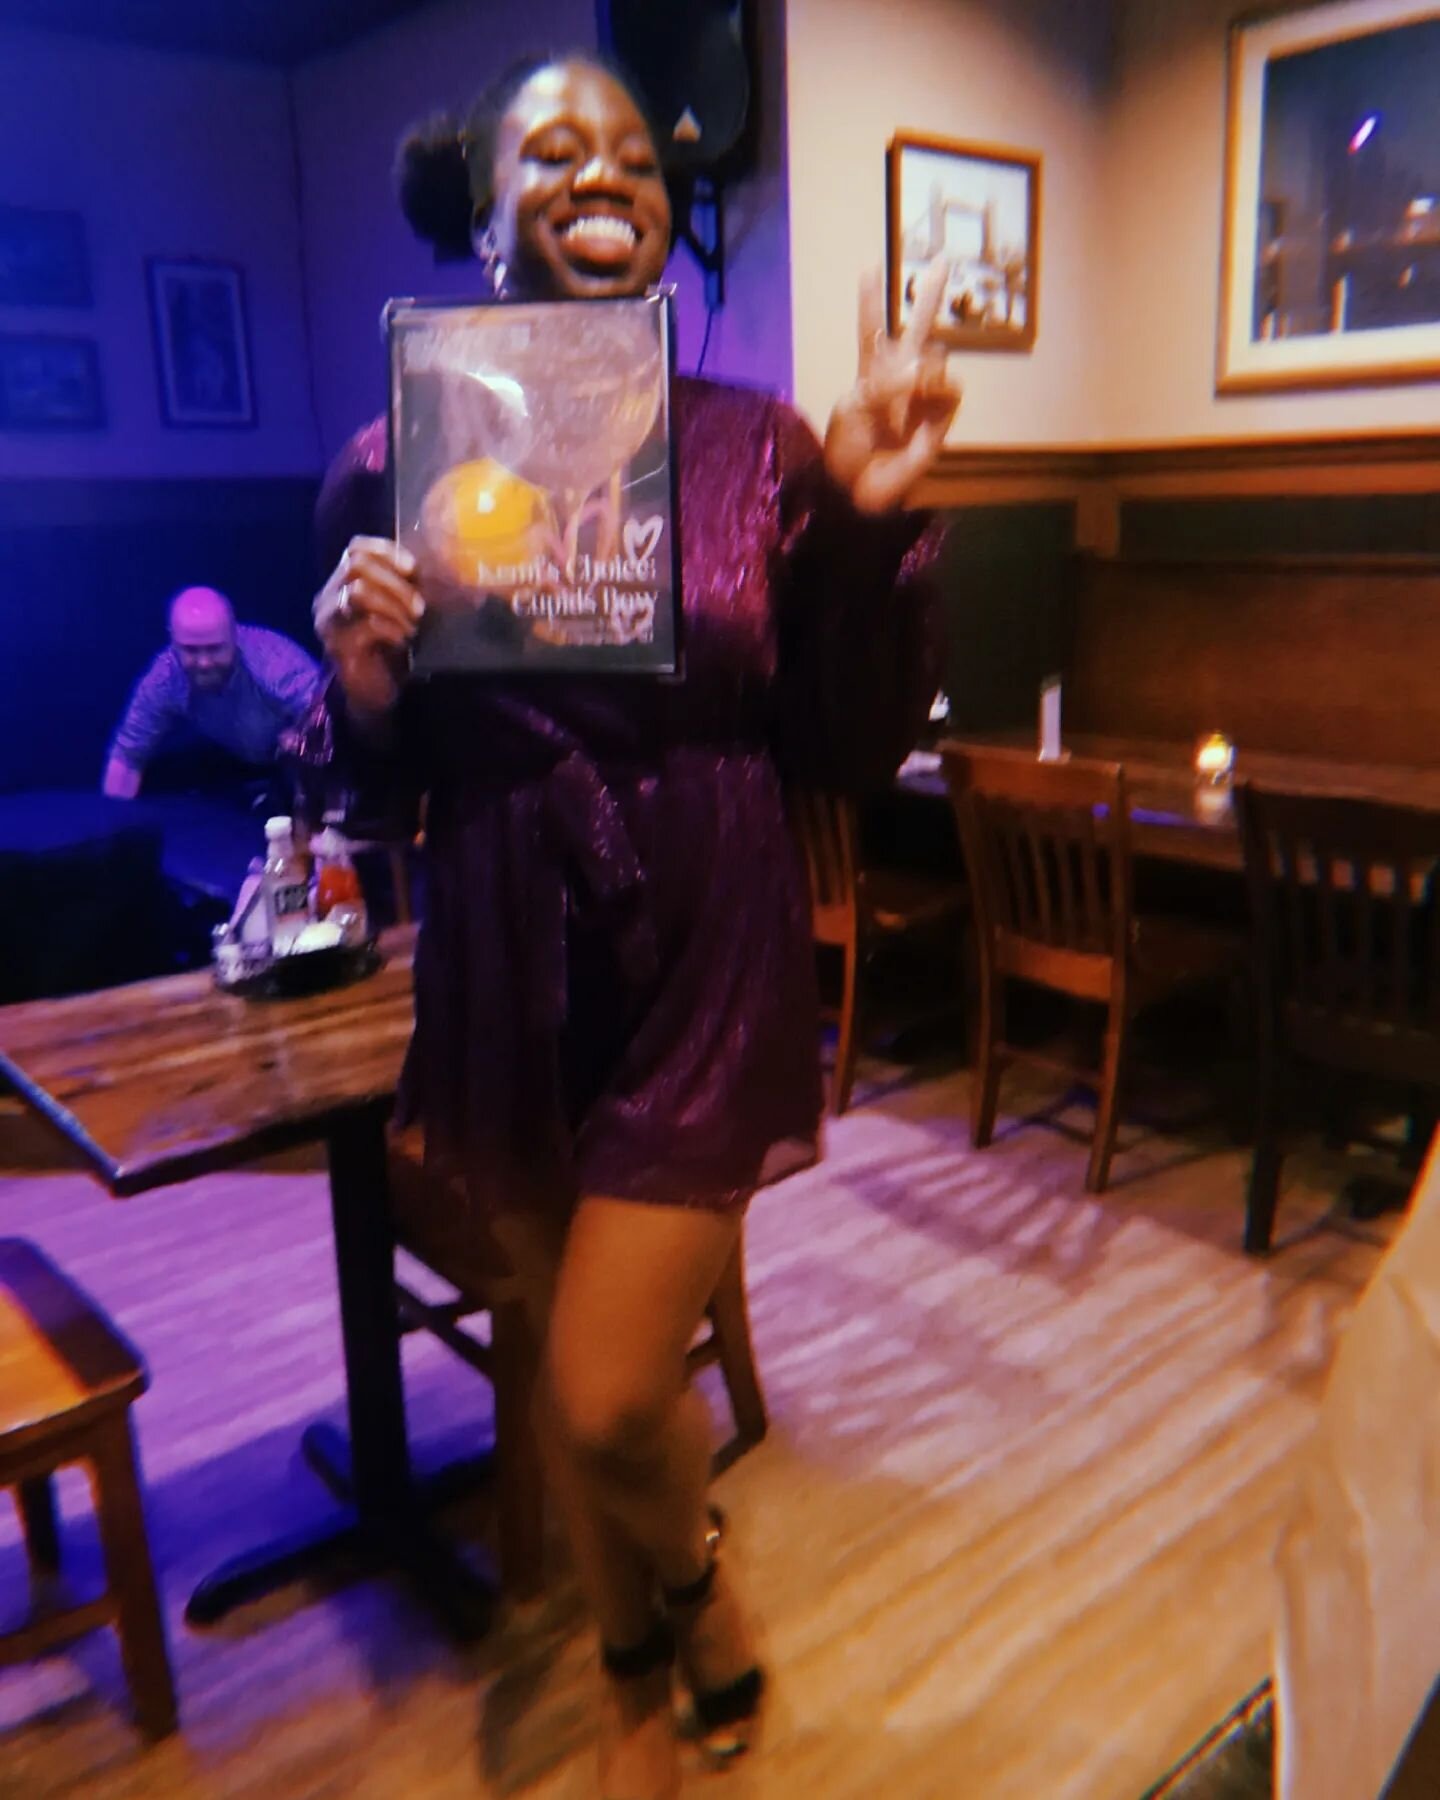 Played some tunes and served some looks with my custom Valentine's cocktail #cupidsbow 🥂💘

s/o to @bootsieandthegroove, @chrishonmusic, and @the_musselman for the grooviest of grooves. Till next time @hawkandgriffin!